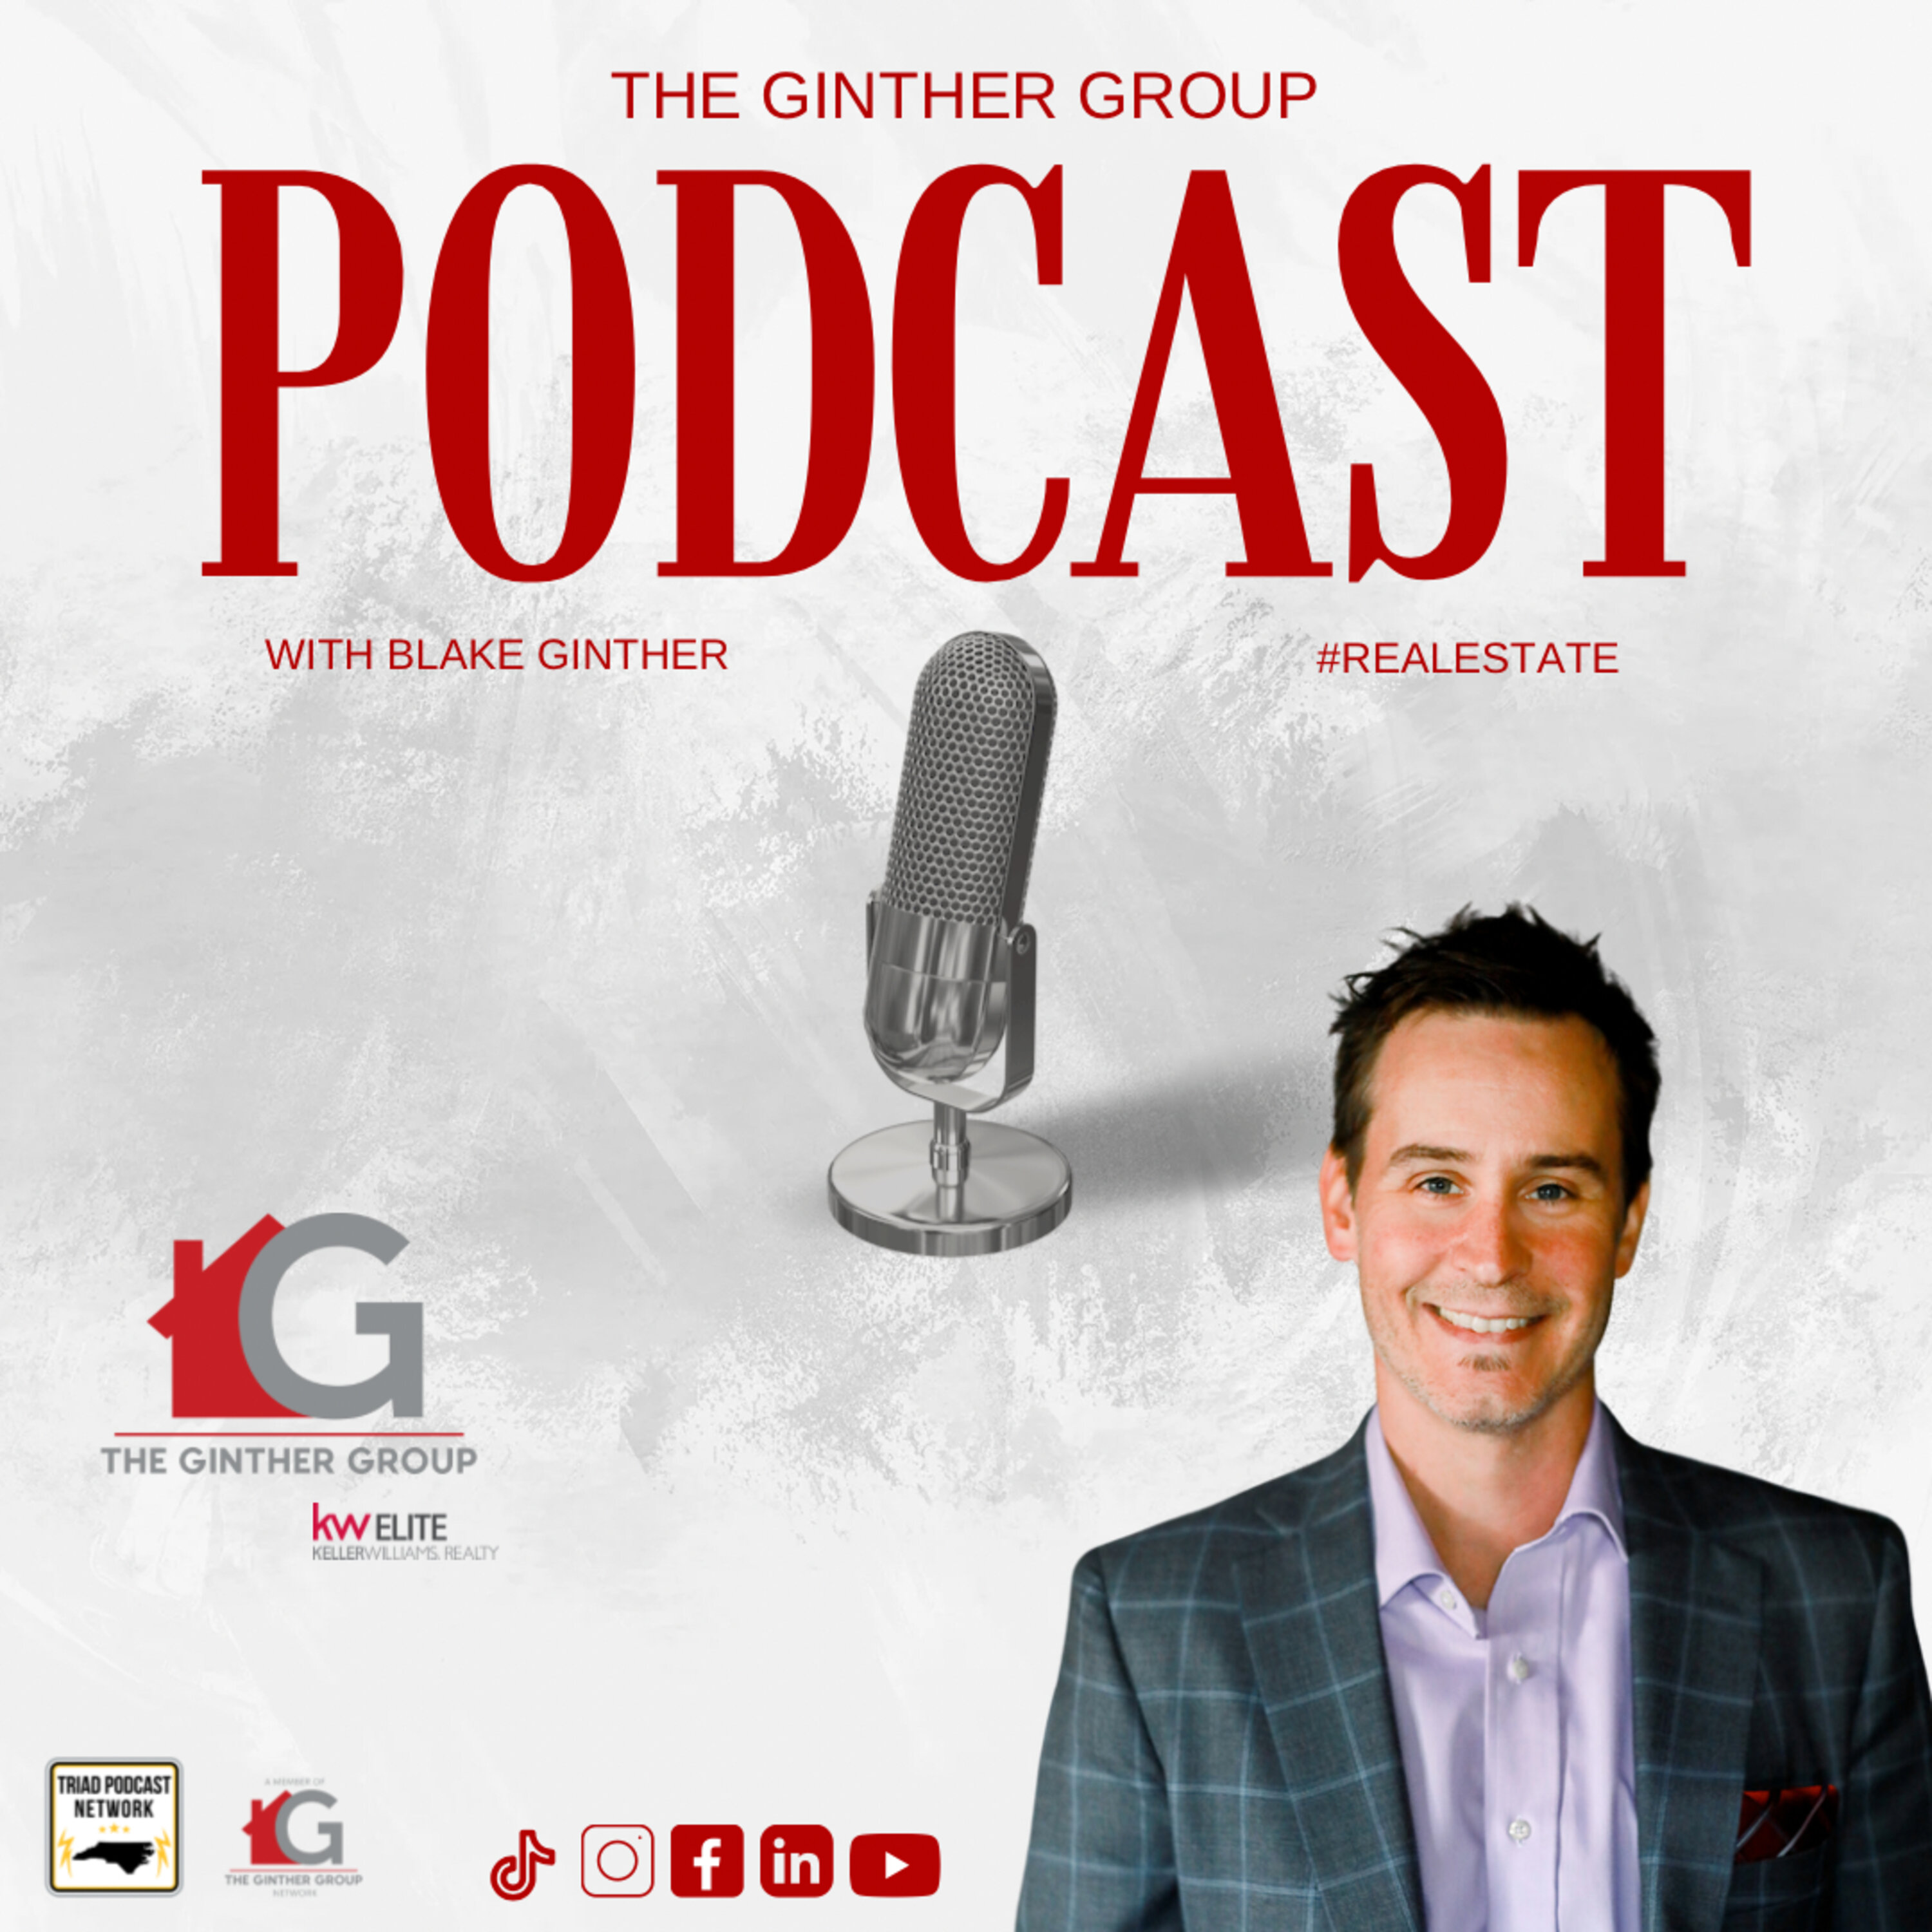 Ginther Group Real Estate Podcast - Interest Rates Are Higher, So Should You Buy Or Rent? Image